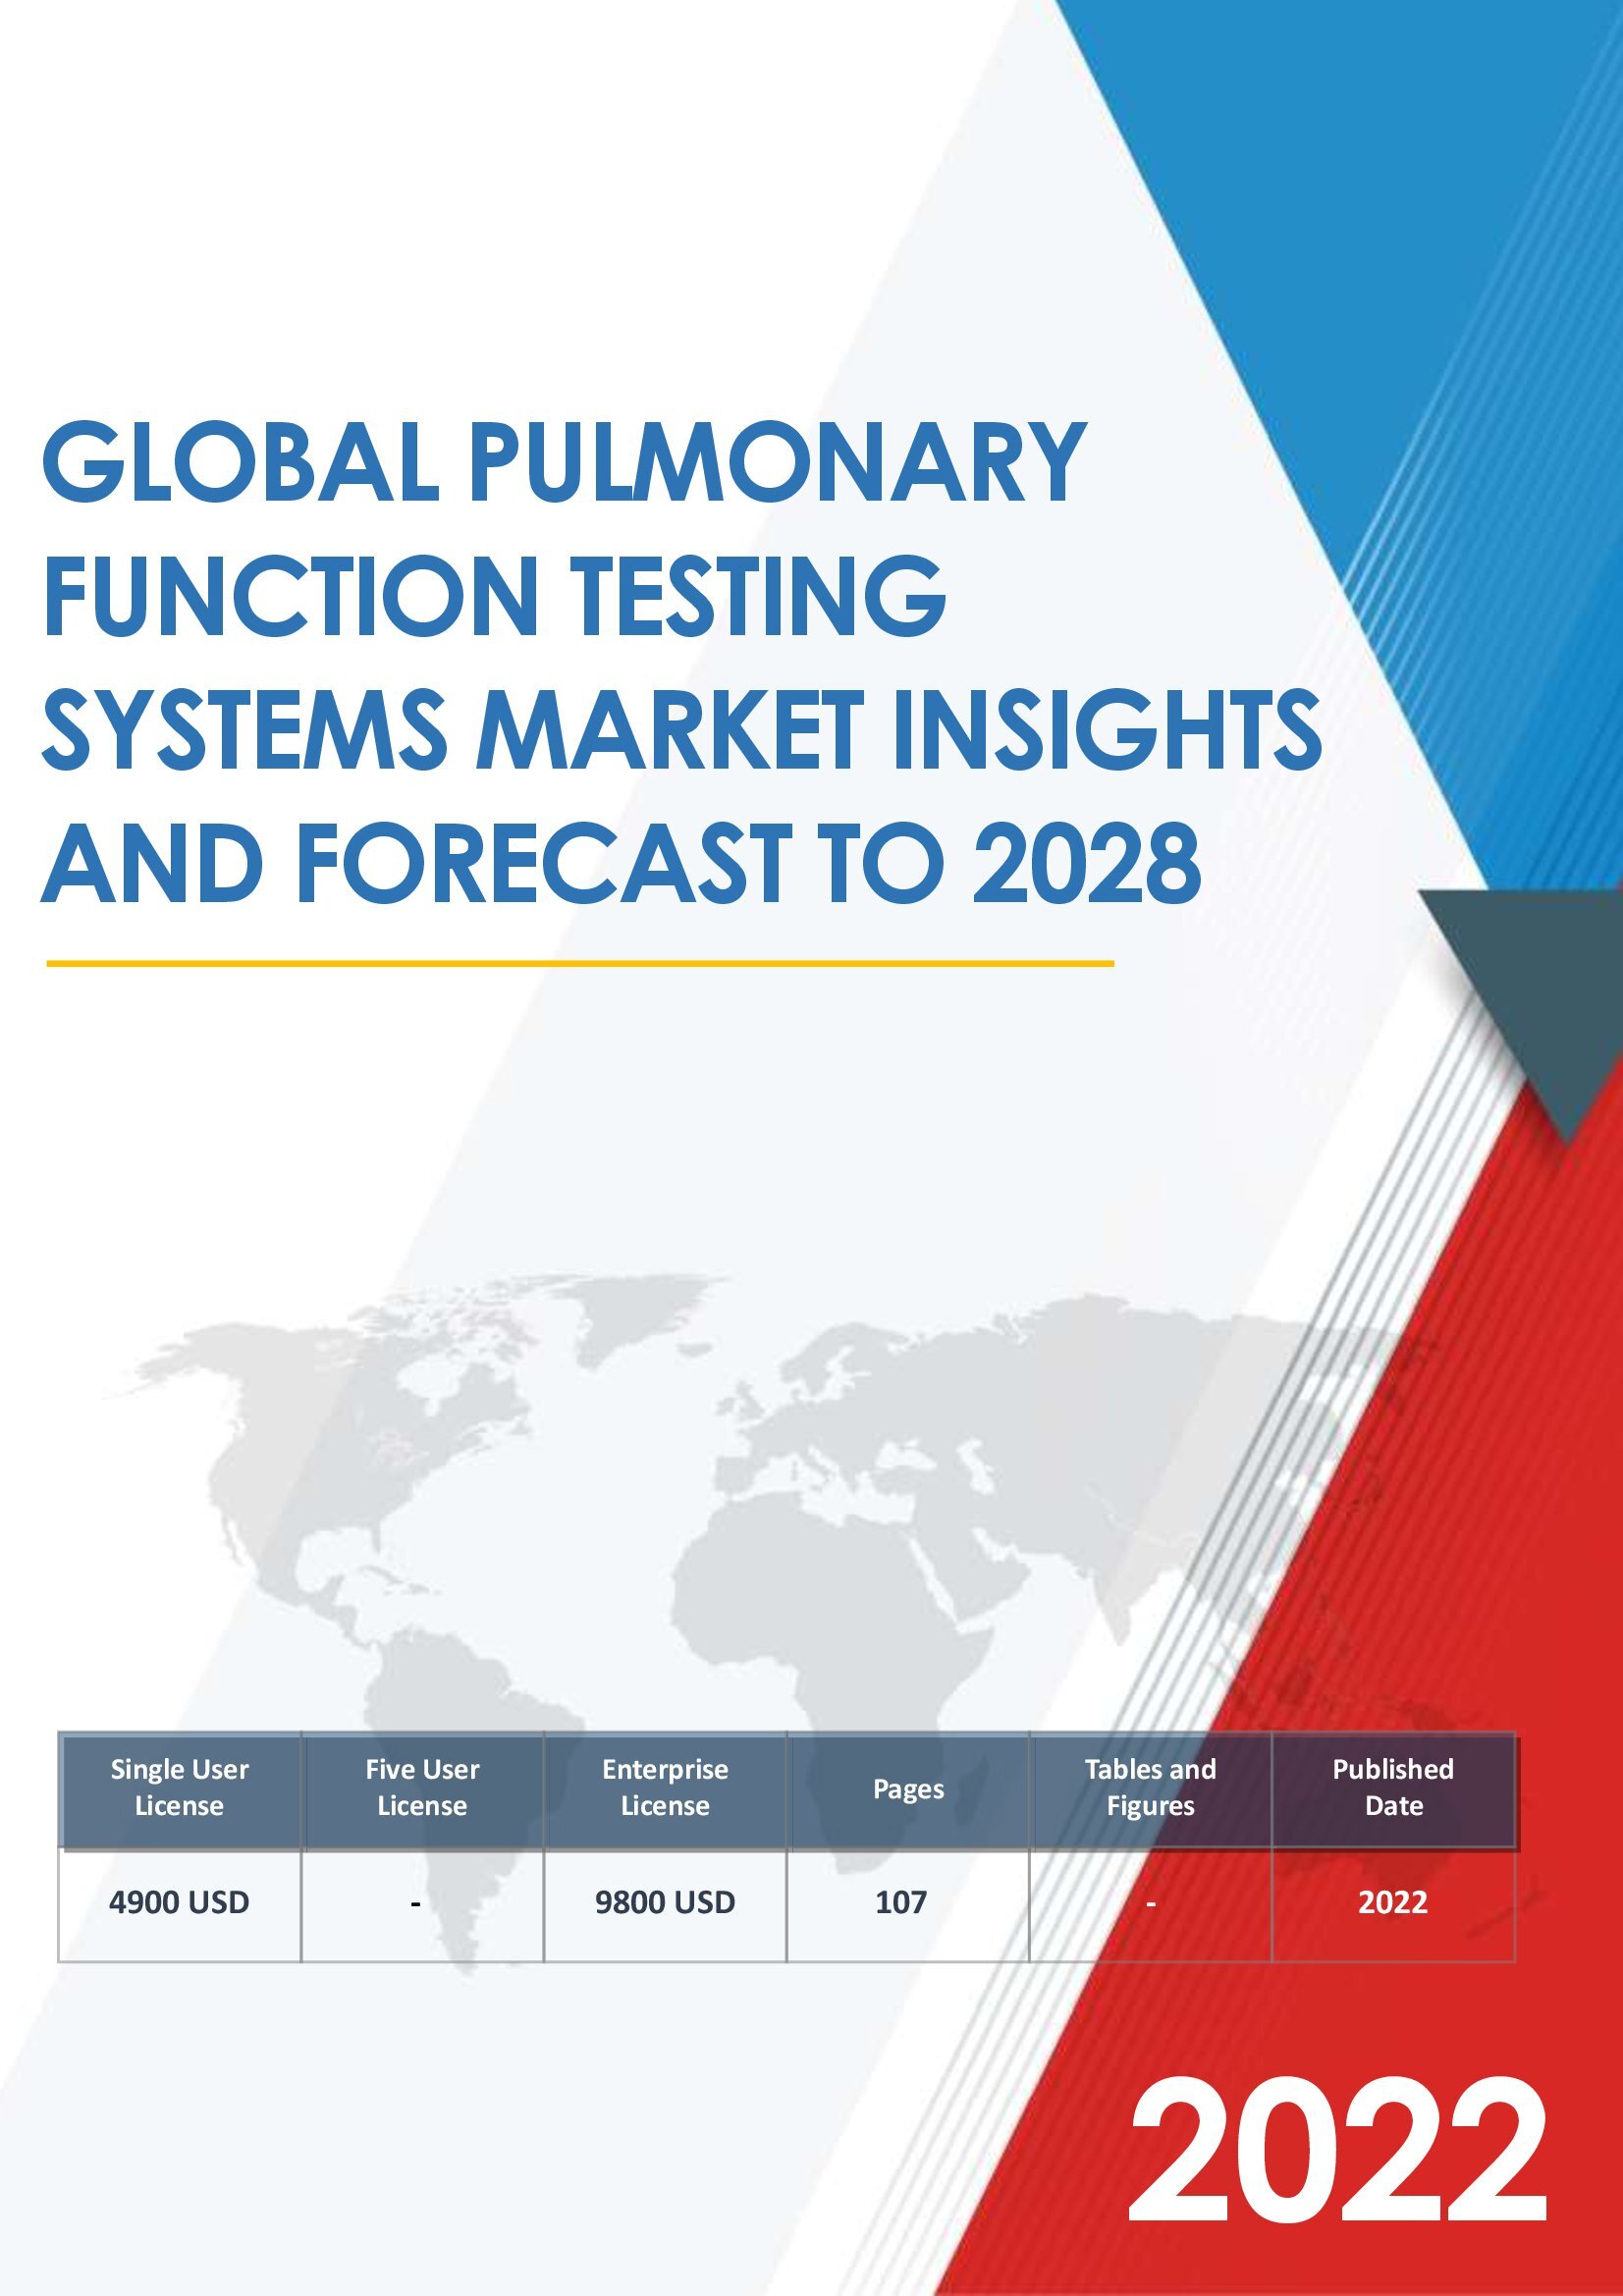 Global Pulmonary Function Testing Systems Market Insights Forecast to 2026